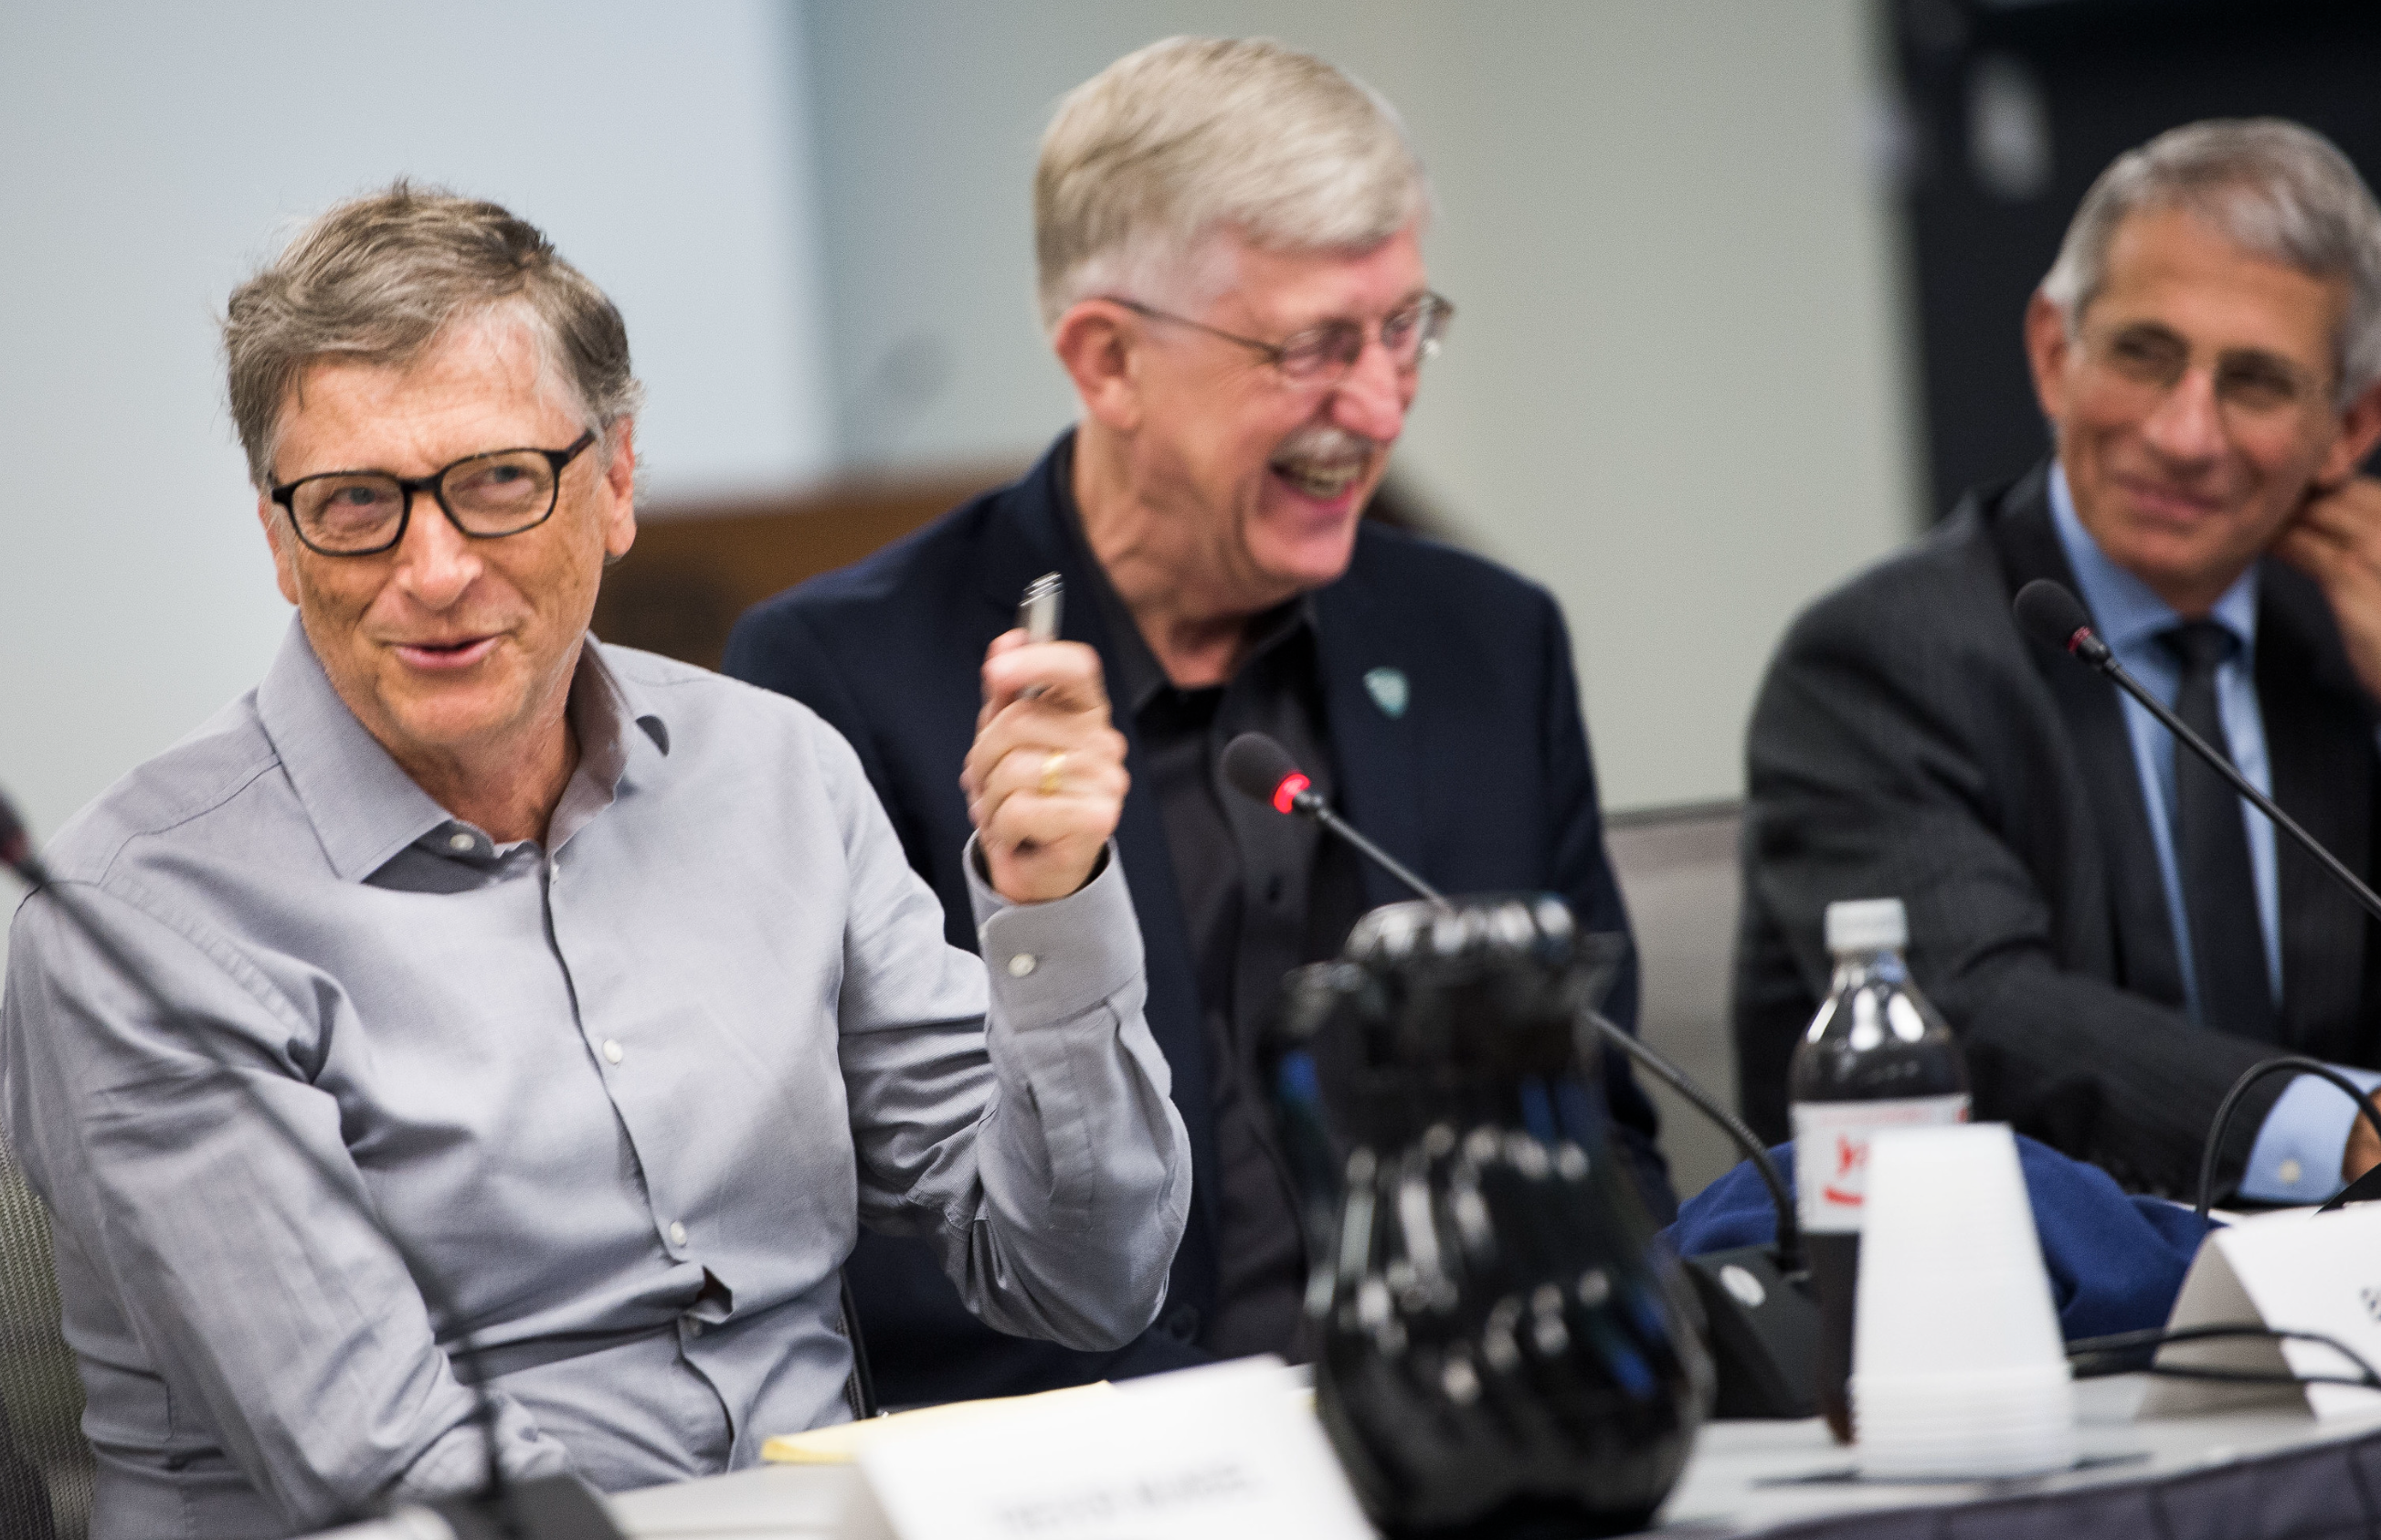 National Institutes of Health Director Dr. Francis Collins and National Institute of Allergy and Infectious Diseases Director Dr. Anthony Fauci meet with Bill Gates of the Bill and Melinda Gates Foundation to discuss research opportunities in global health